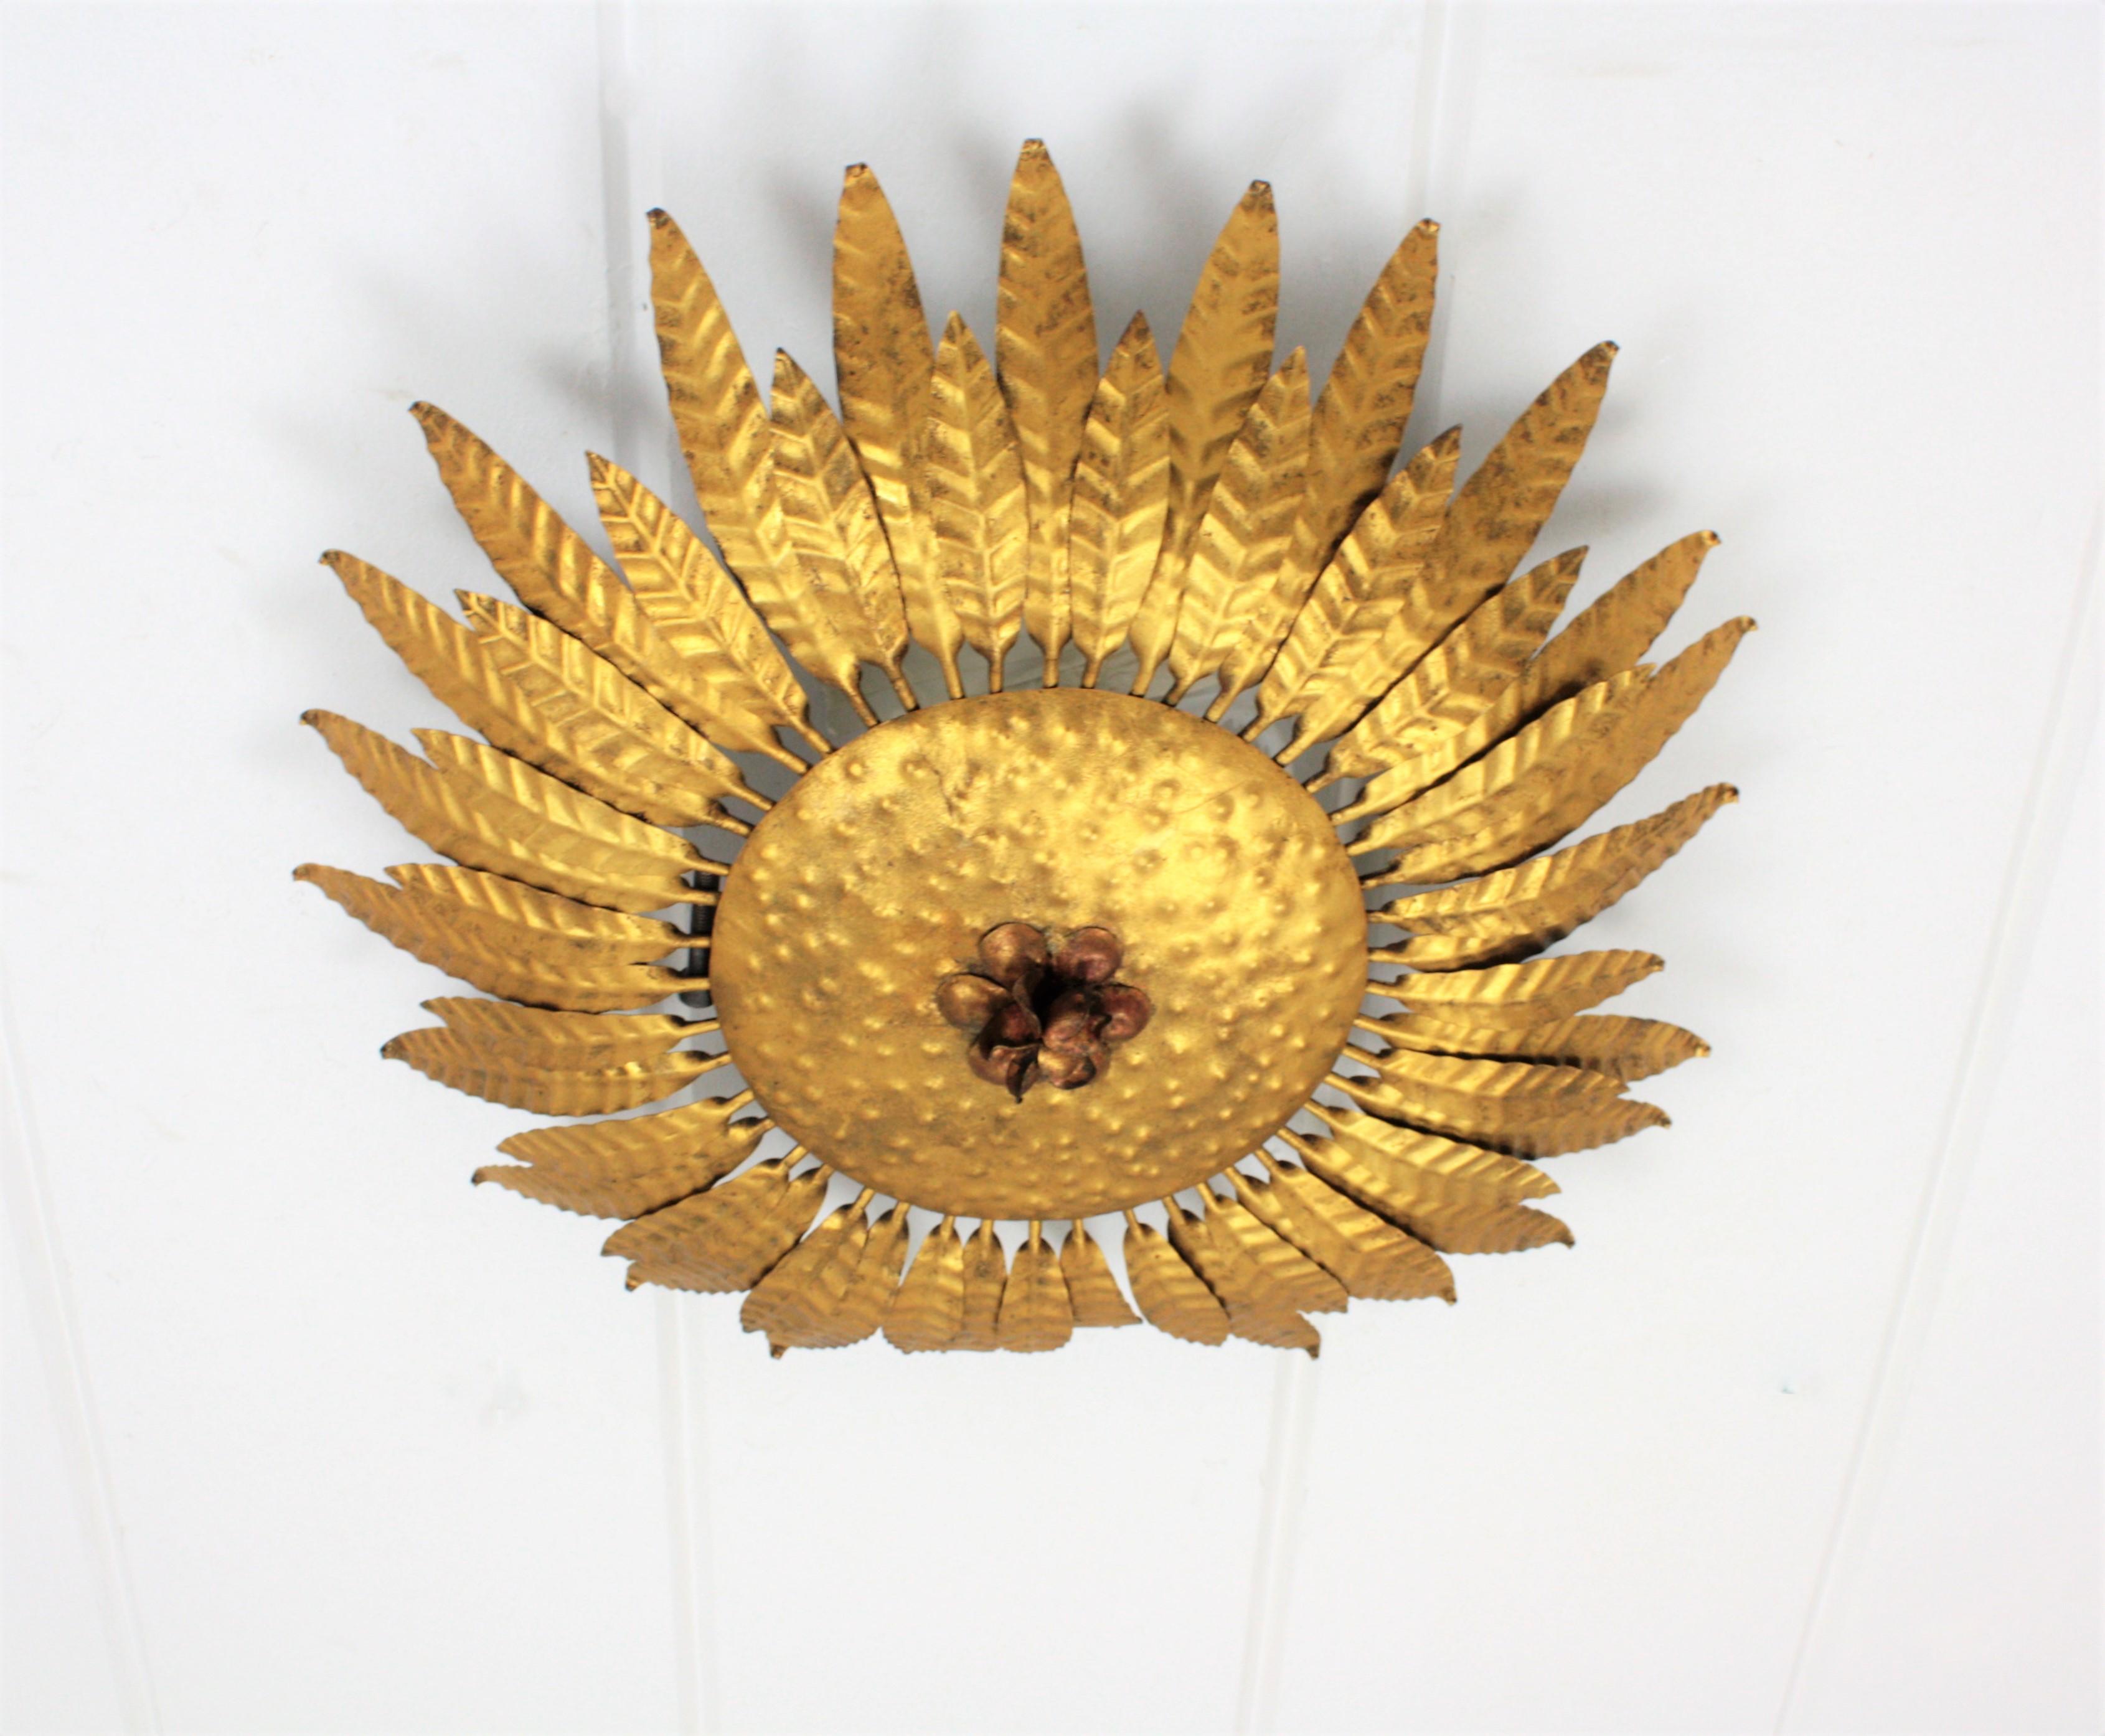 Eyecatching handcrafted gilt iron flower burst ceiling sconce or wall light fixture. Spain, 1960s.
It has a beautiful frame with leaves and a red flower accenting  the center of the fixture. 
Manufactured in Spain at the Mid-Century Modern Period in